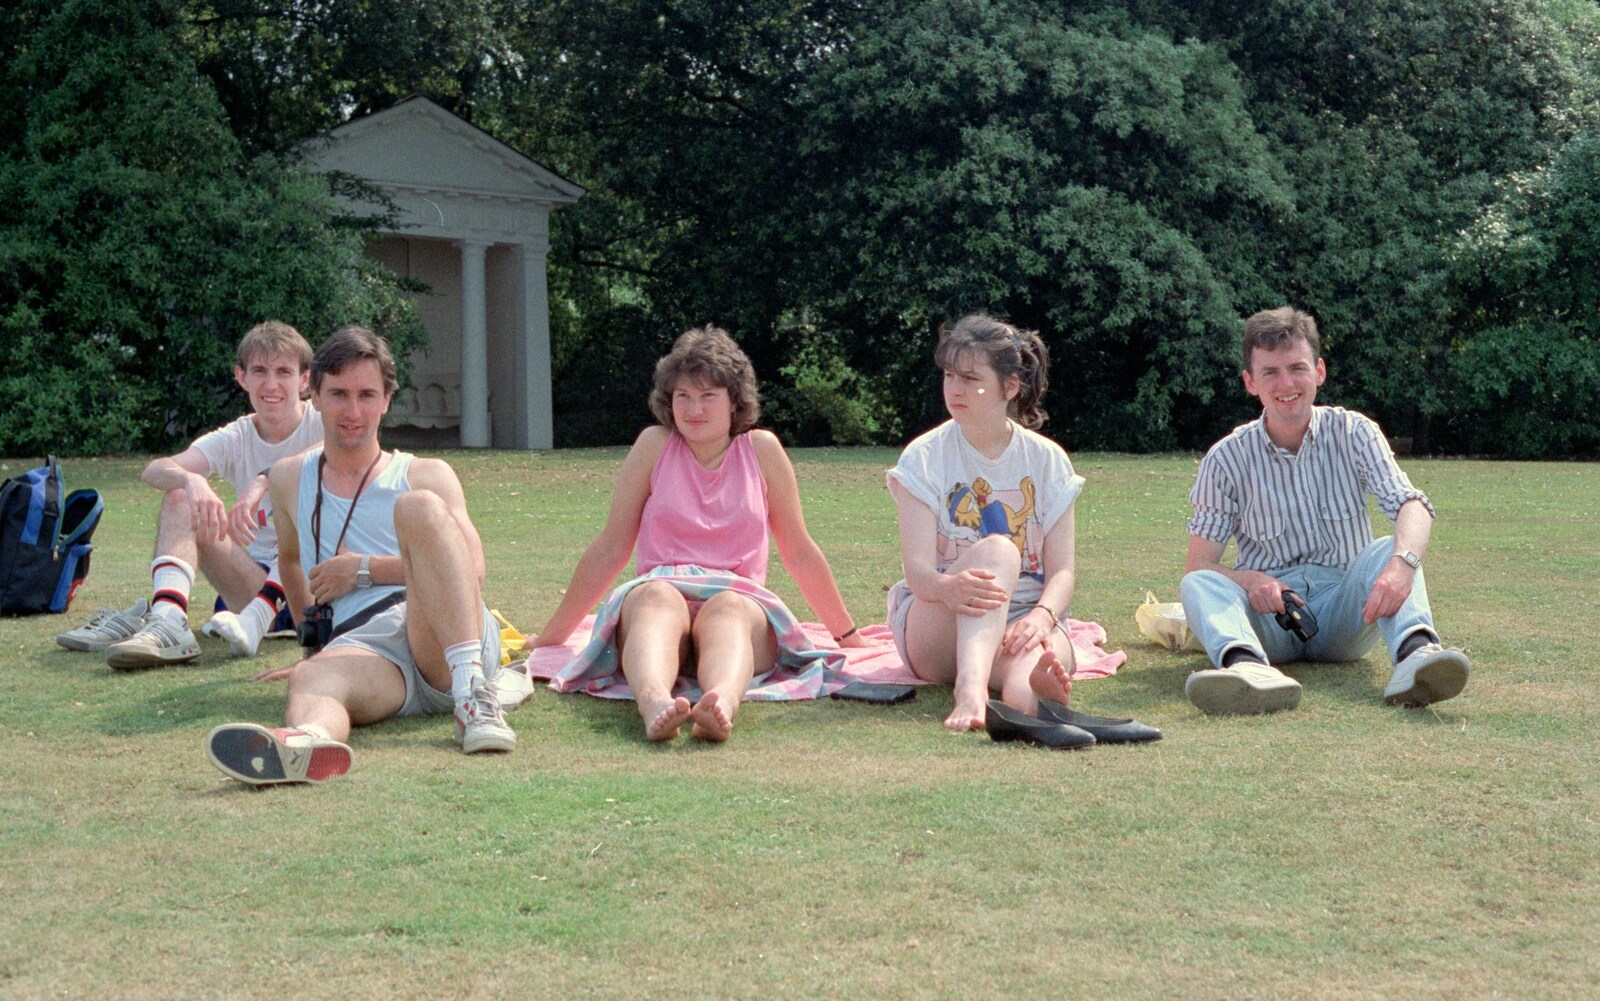 Dave, Riki, Angela, Jackie and John from Uni: A Trip to Mount Edgcumbe, Cornwall - 17th June 1989